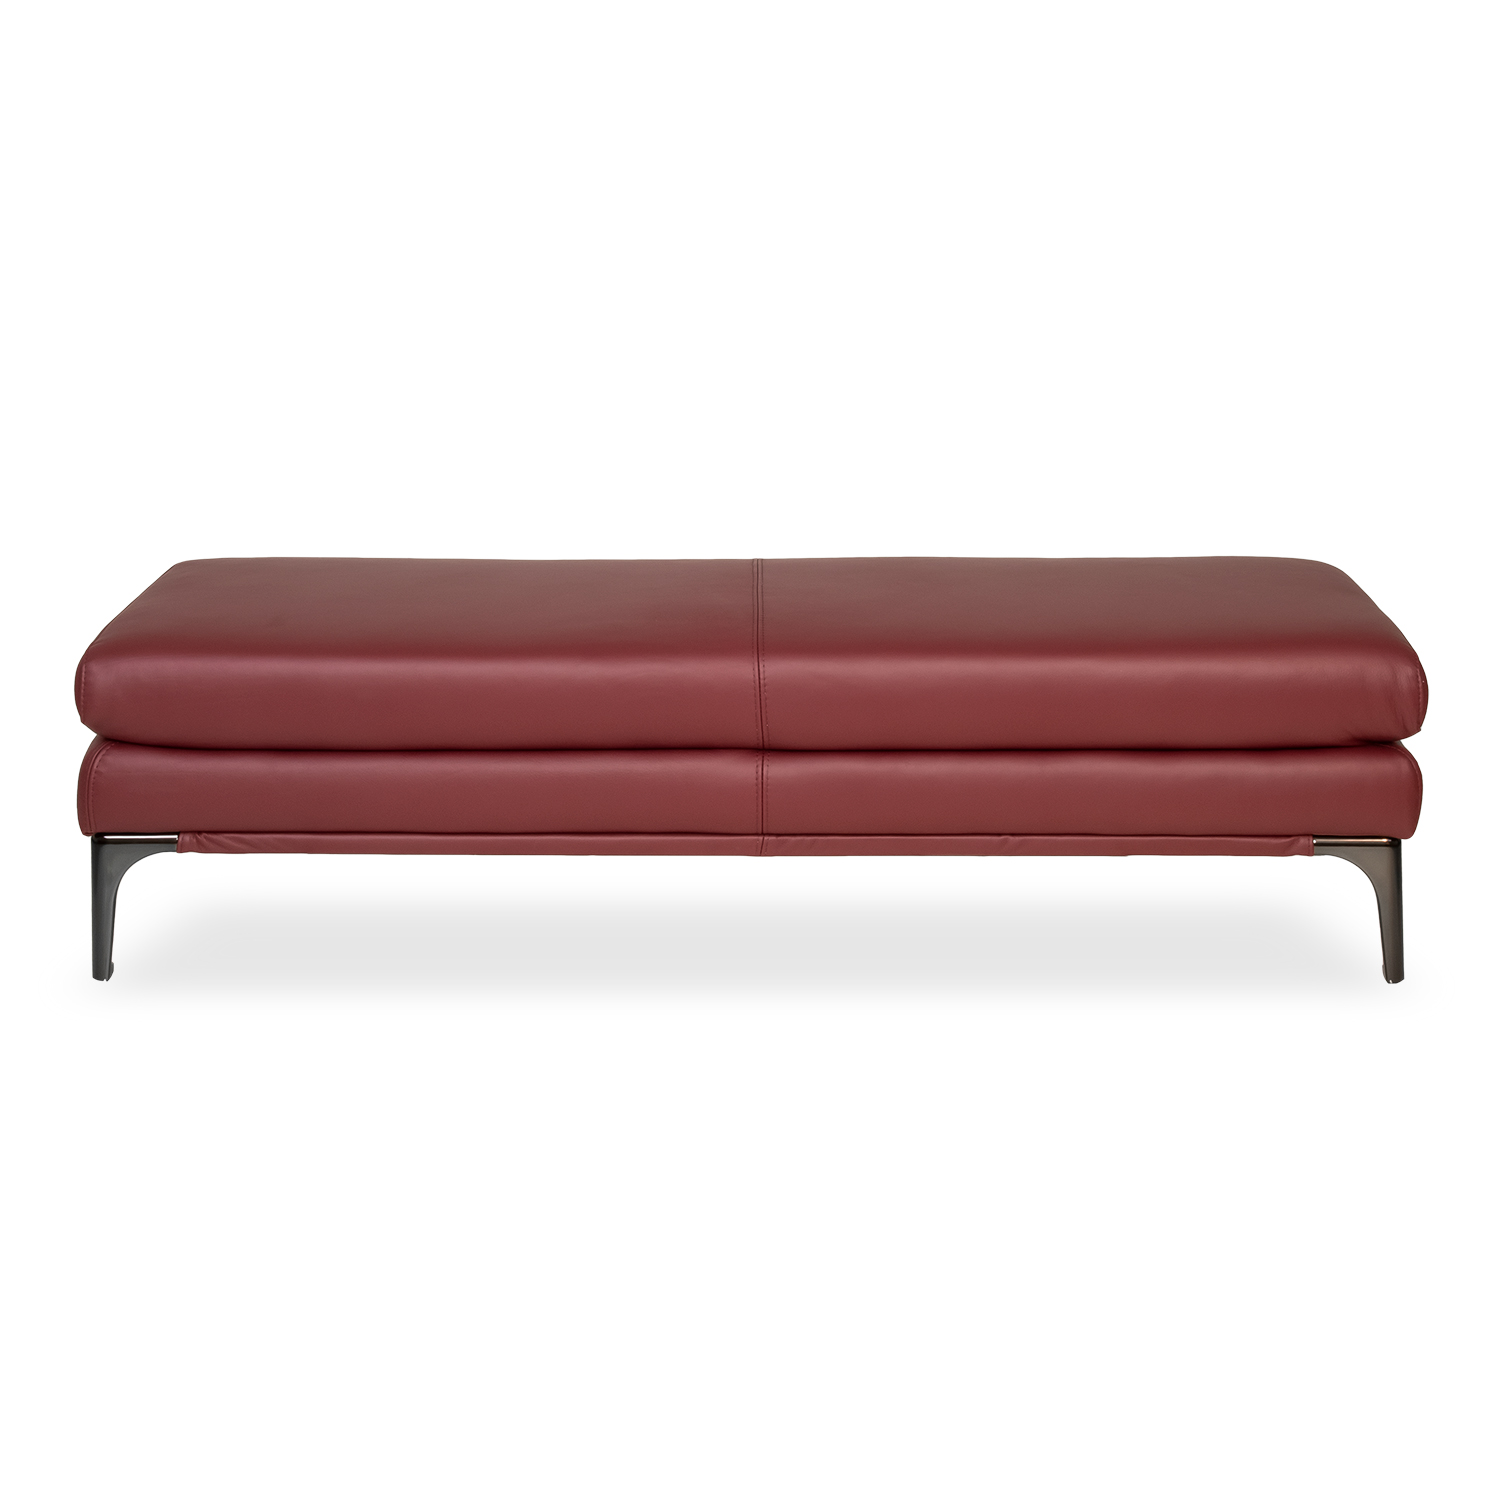 Allure Bench Ruby